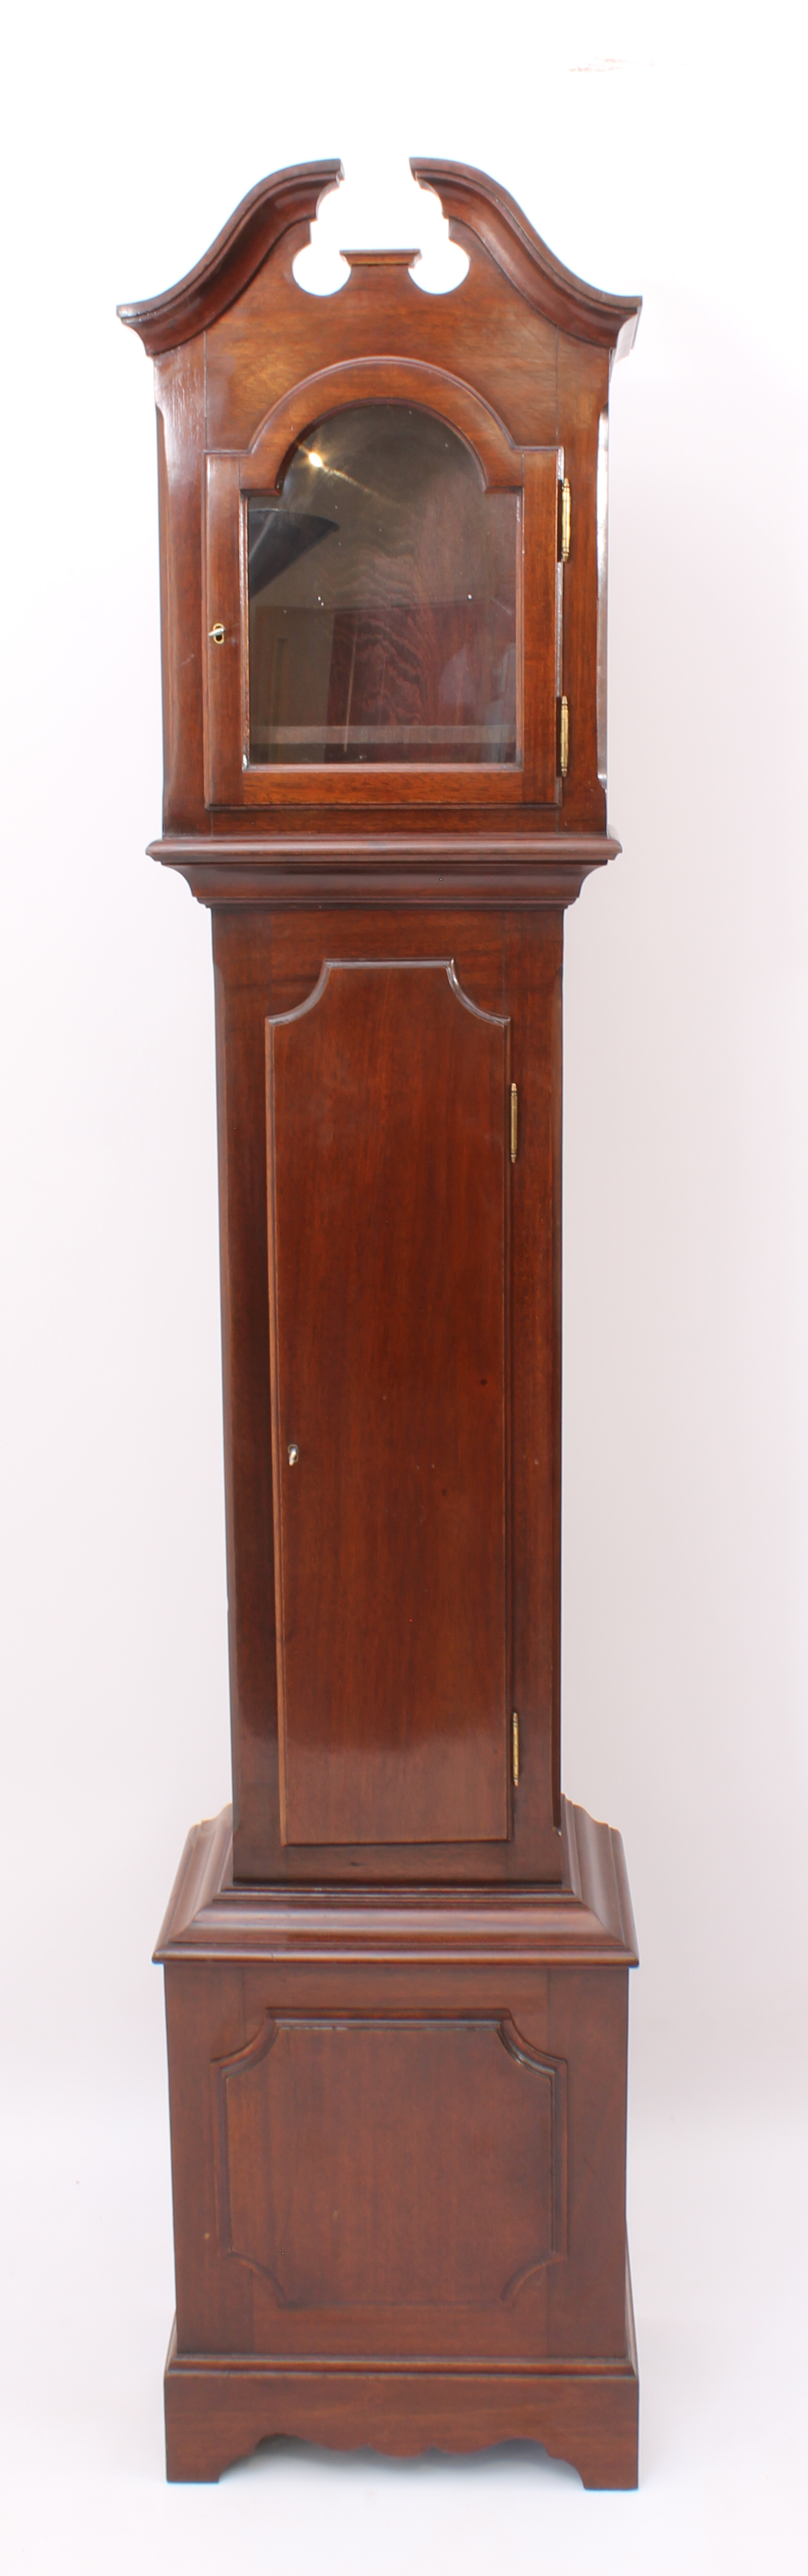 A mahogany longcase clock-case of small proportions - early 20th century, 179.25 cm high, 37.5 cm